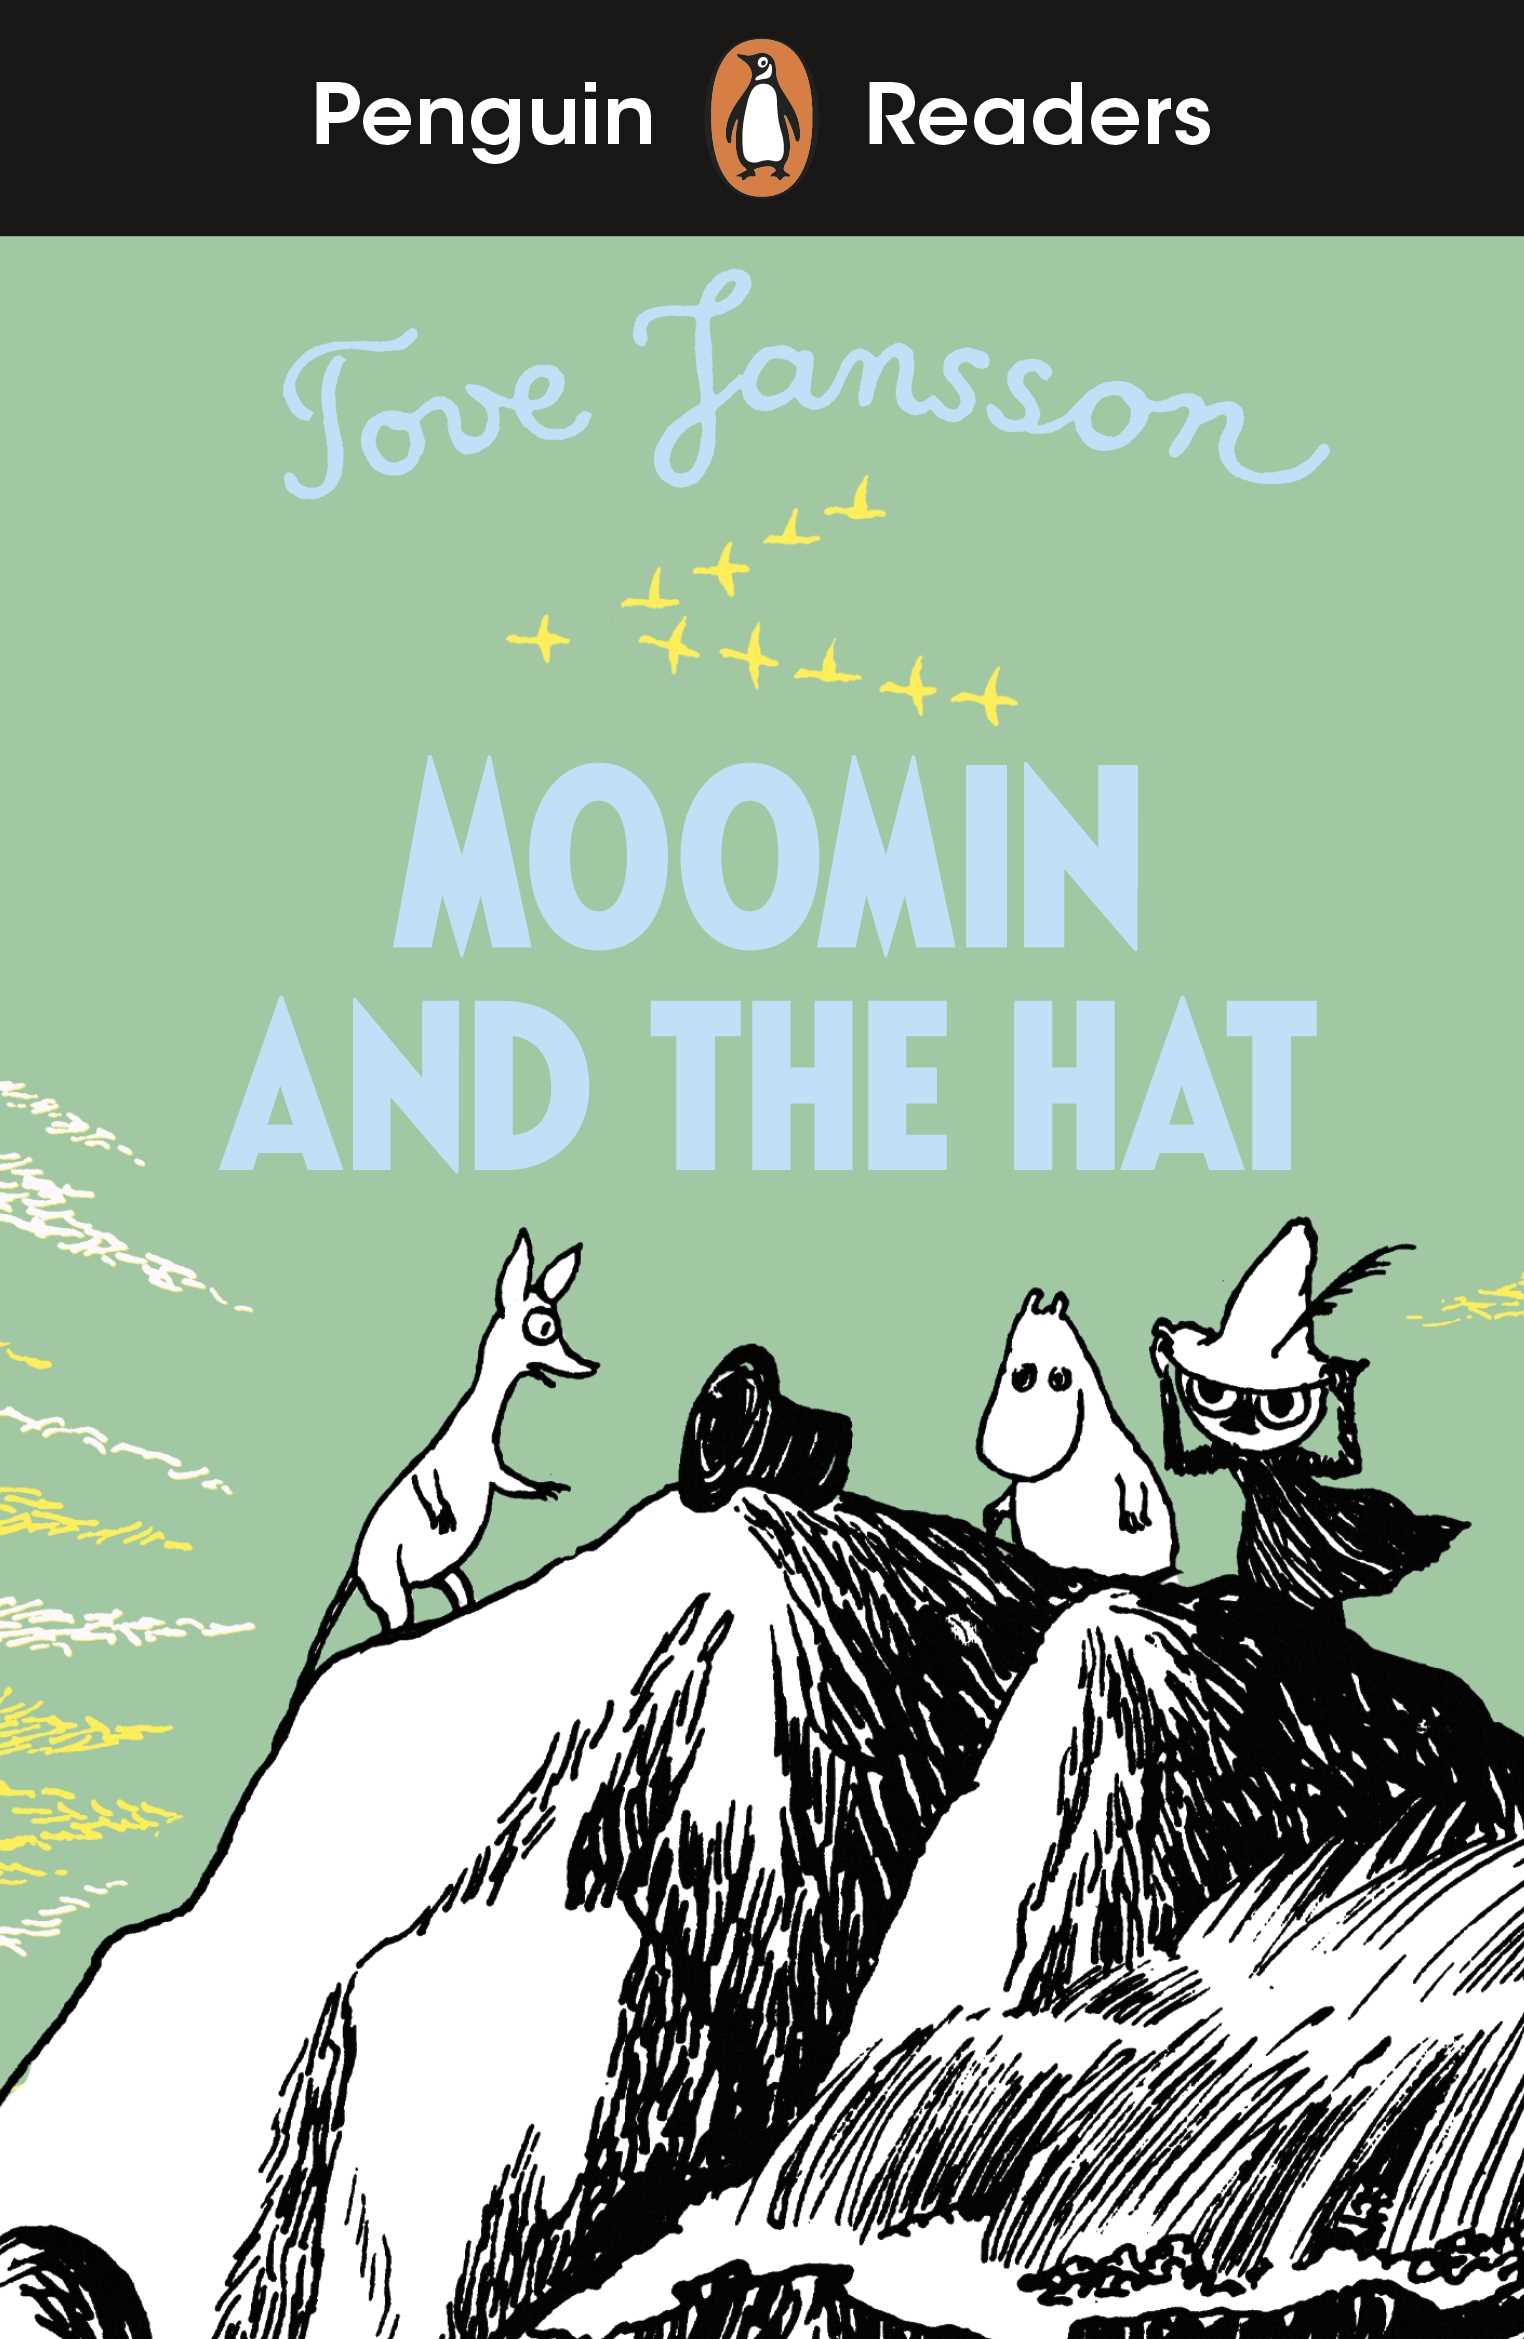 Moomin and the Hat (Penguin Readers L3)